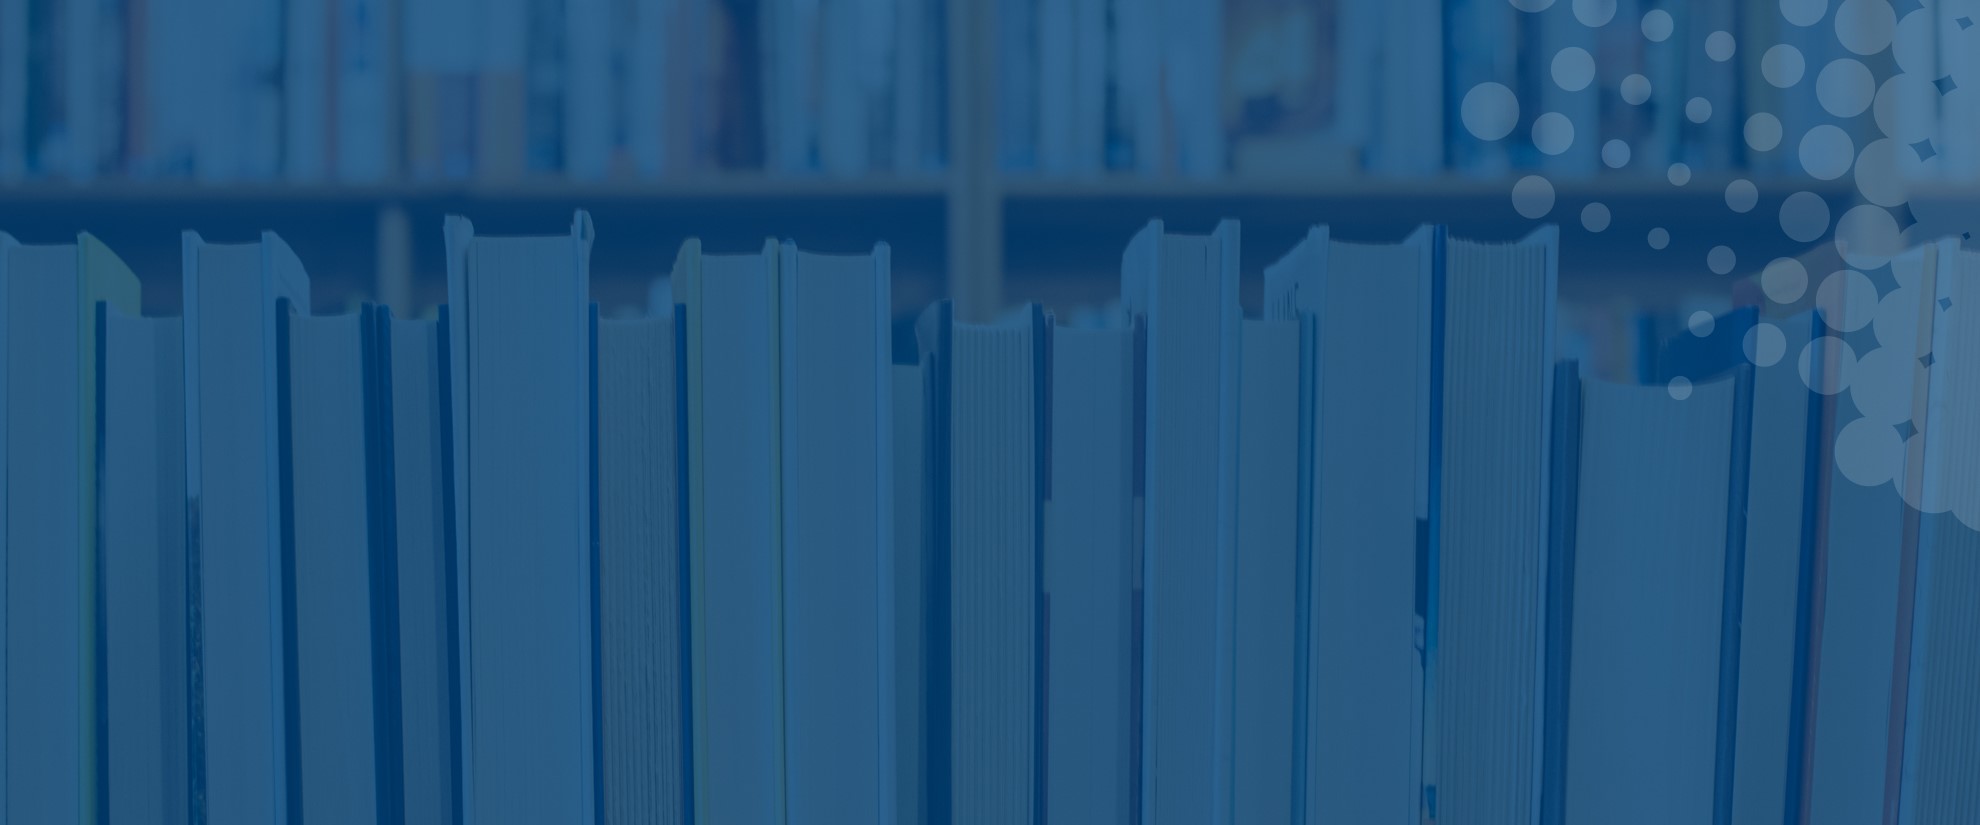 row of printed books on blue background